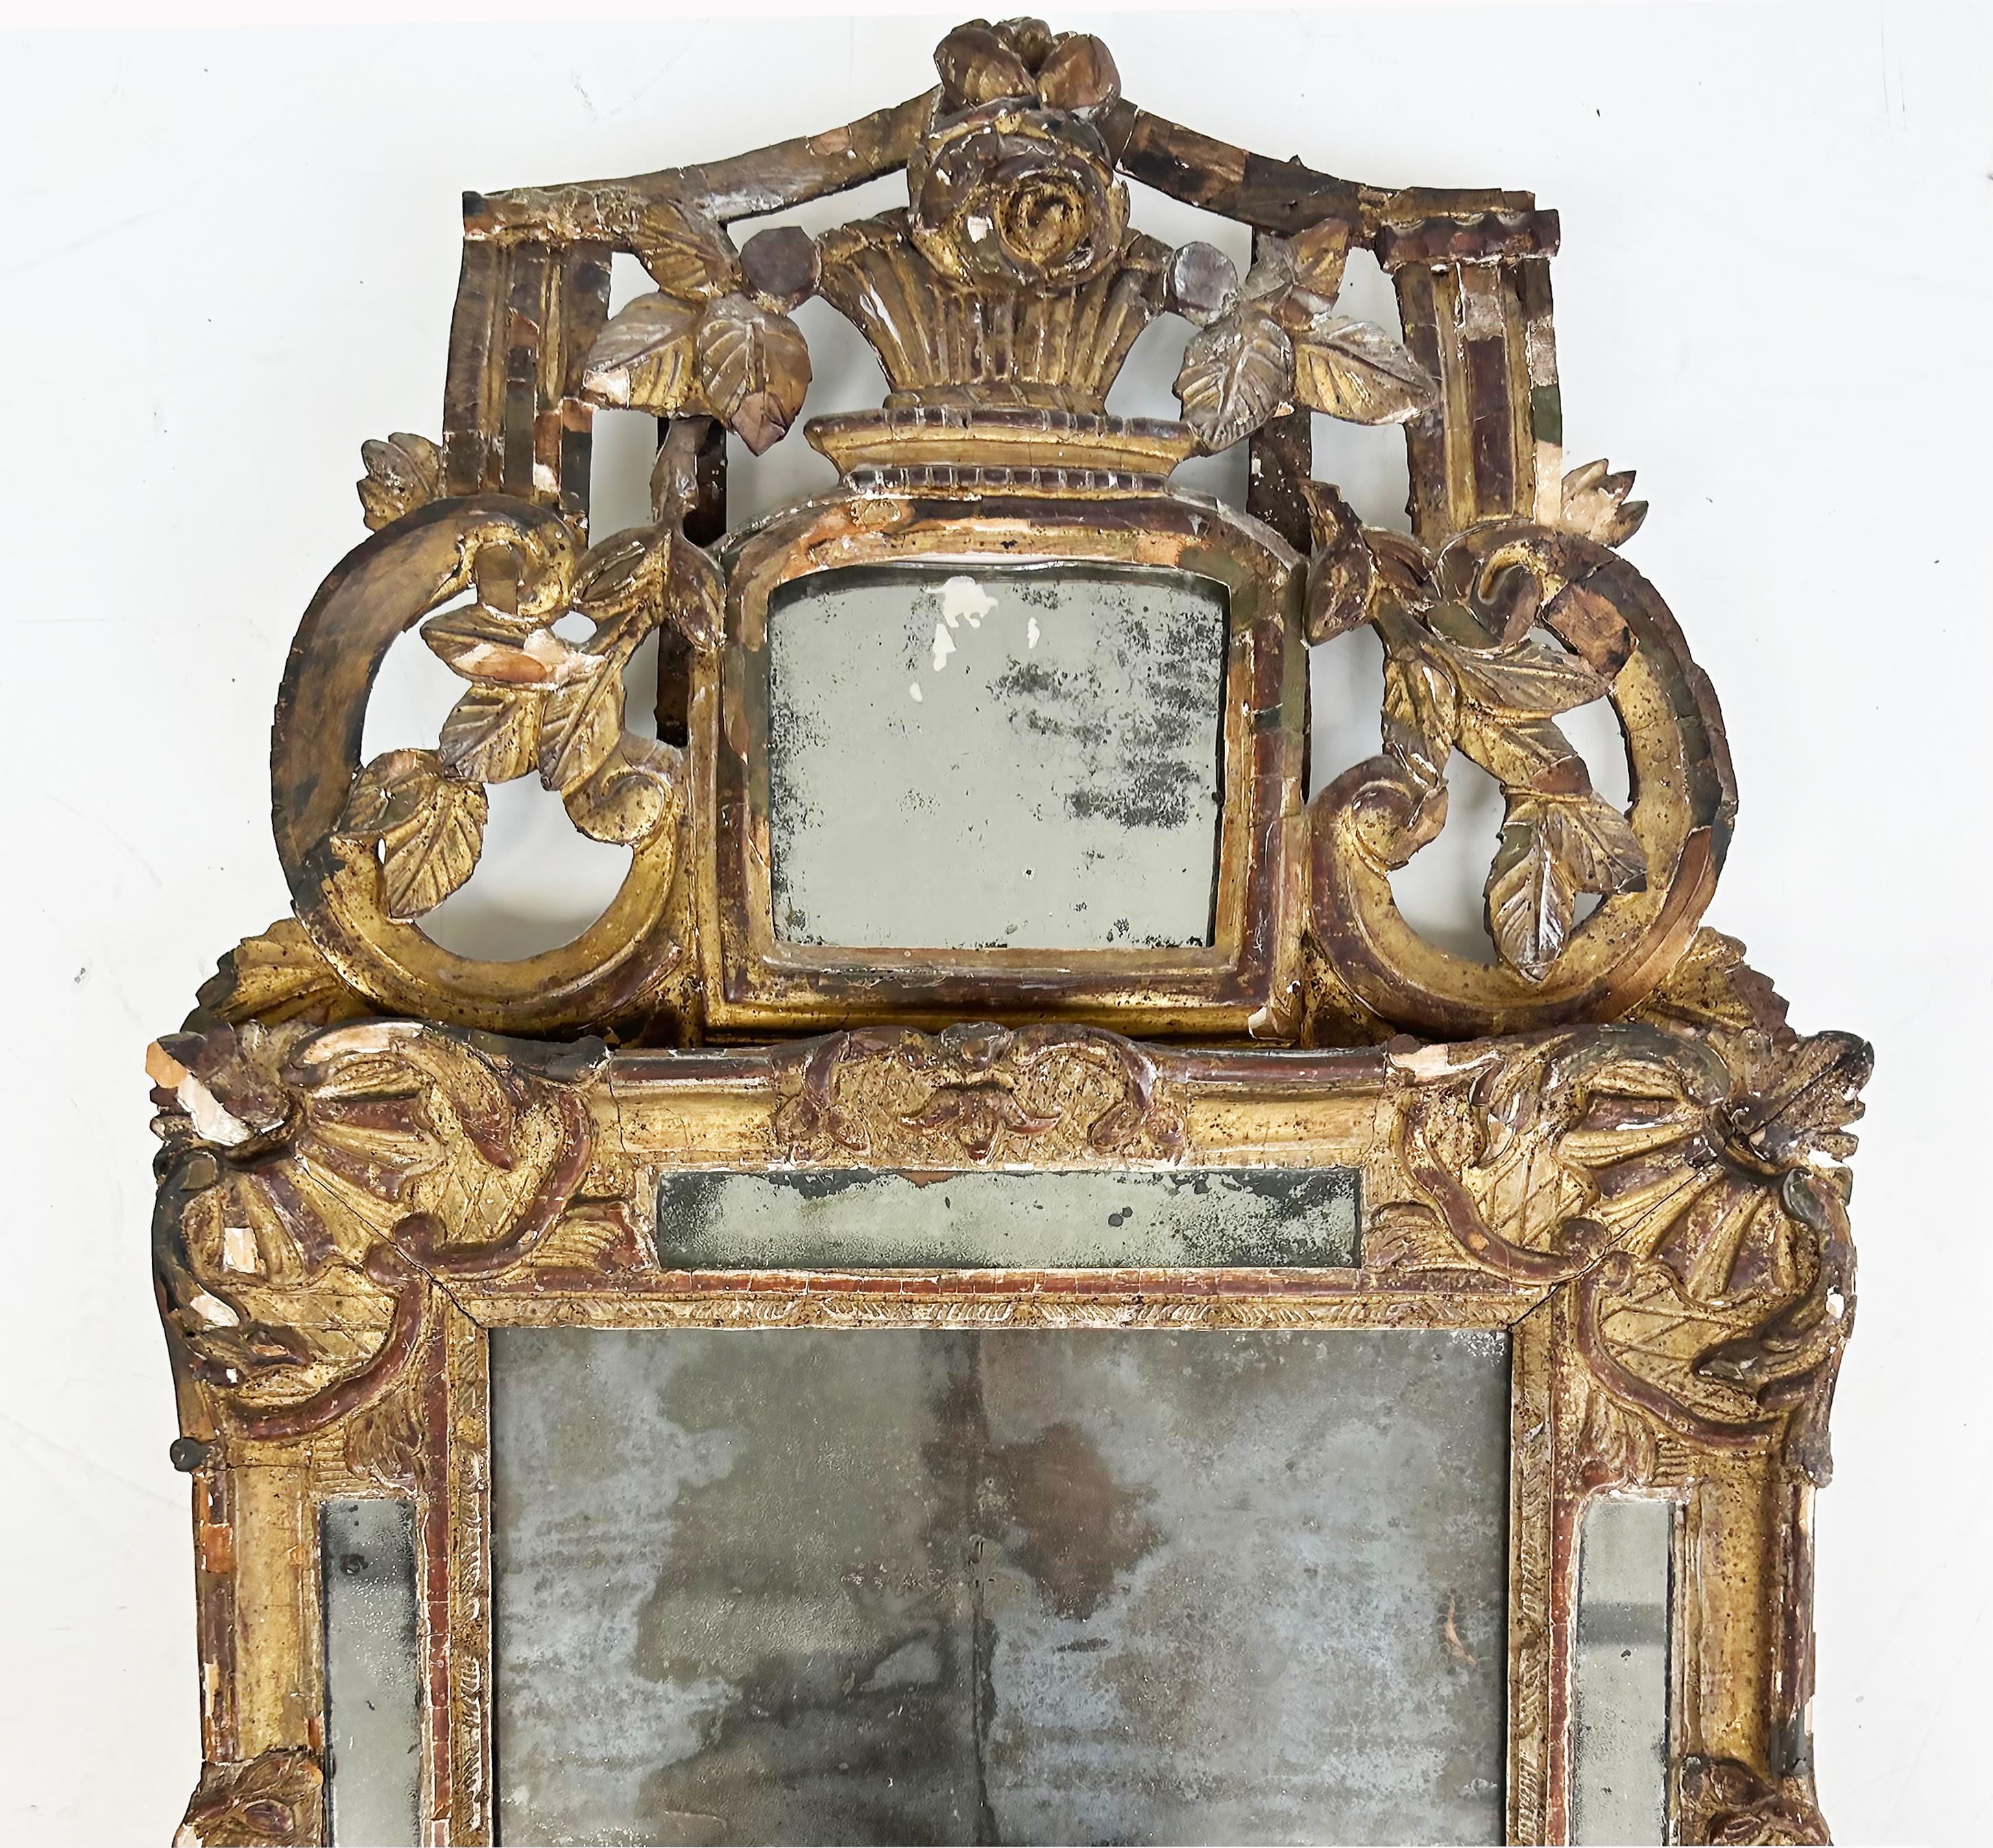 18th Century Carved Giltwood Gesso Provençal Mercury Mirror, Original Gilding

Offered for sale is an 18th-century French provincial carved giltwood and gesso mercury mirror with original gilding.  This early wall mirror is backed with wood and is